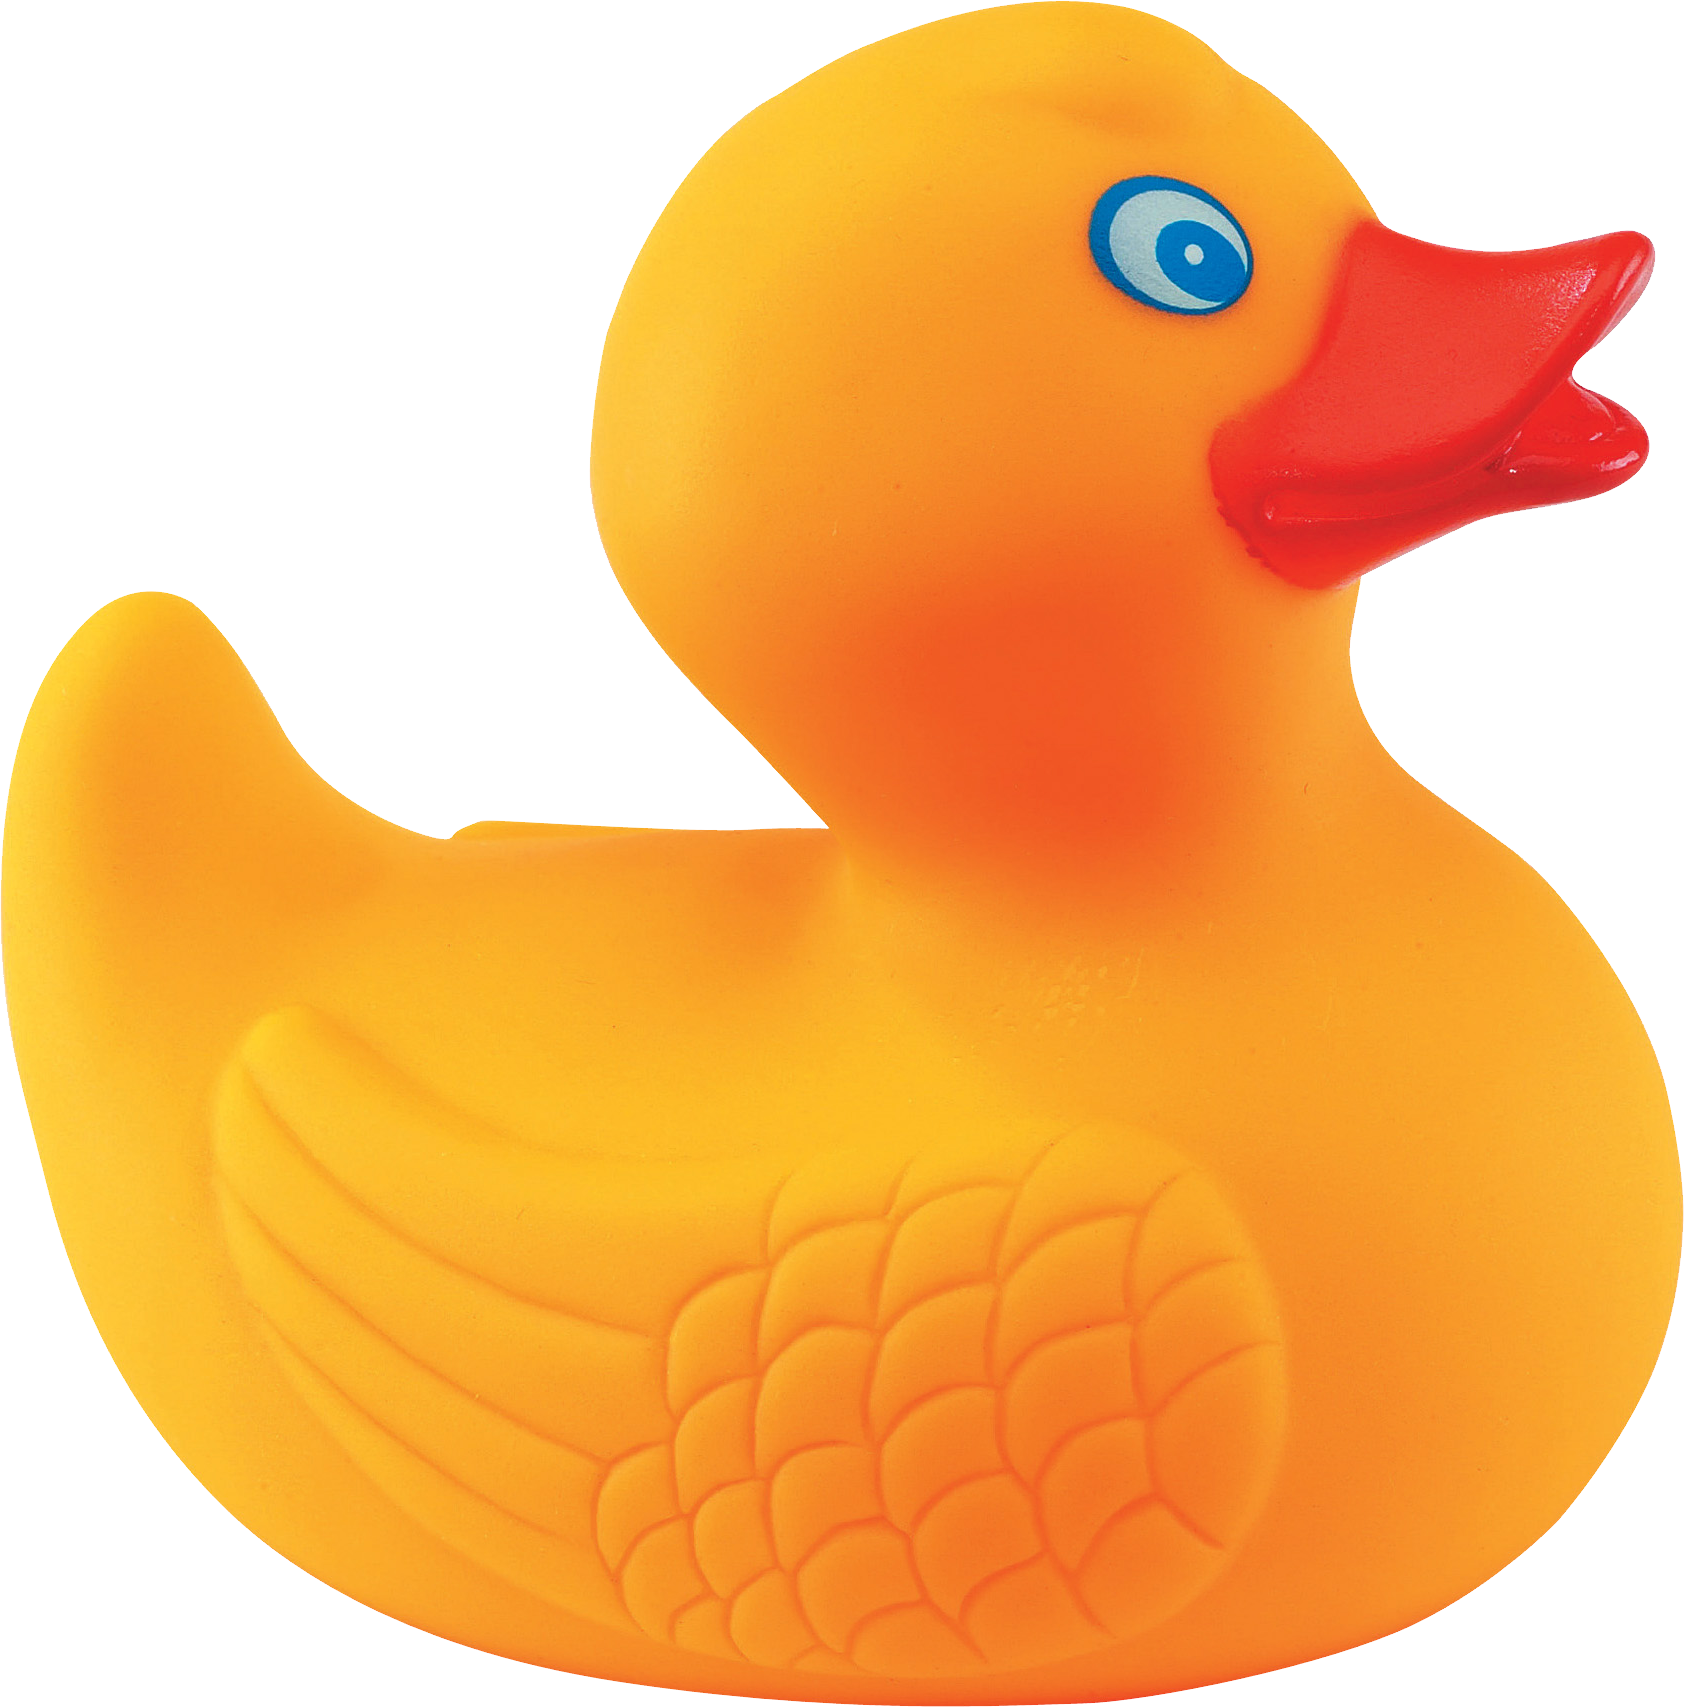 Rubber duck PNG image free Download 